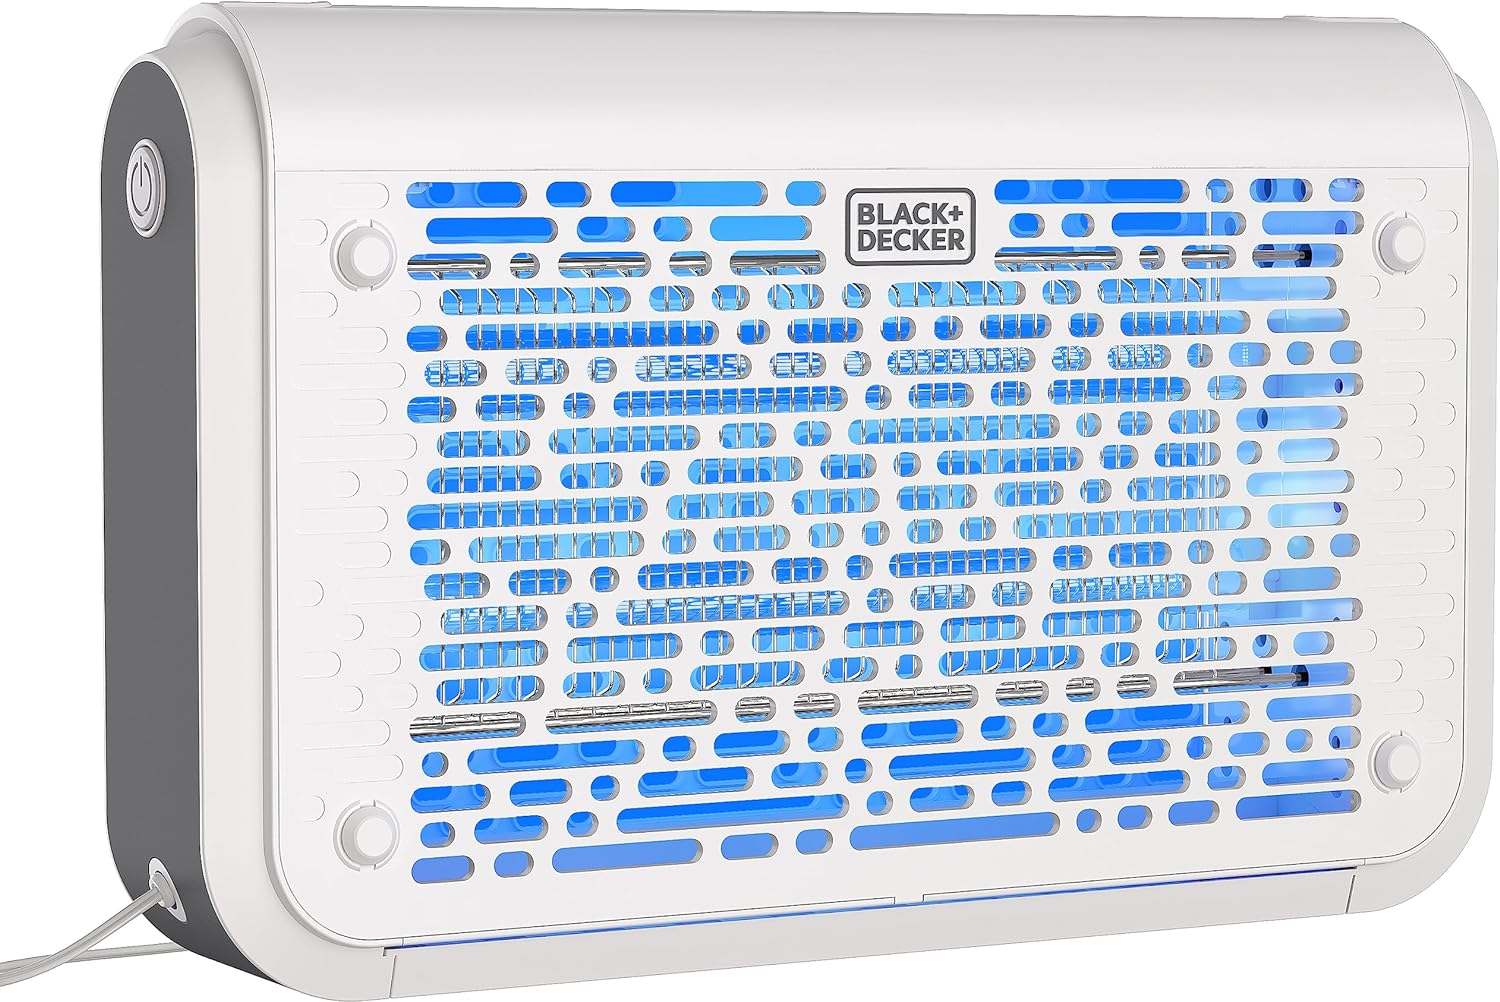 https://bigbigmart.com/wp-content/uploads/2023/10/BLACKDECKER-Bug-Zapper-Electric-UV-Insect-Killer-Catcher-for-Flies-Gnats-Mosquitoes-Other-Flying-Pests-6000-Sq-Ft-Coverage-for-Indoor-Outdoor-Use-Includes-Home-Kitchen-Other-Areas.jpg